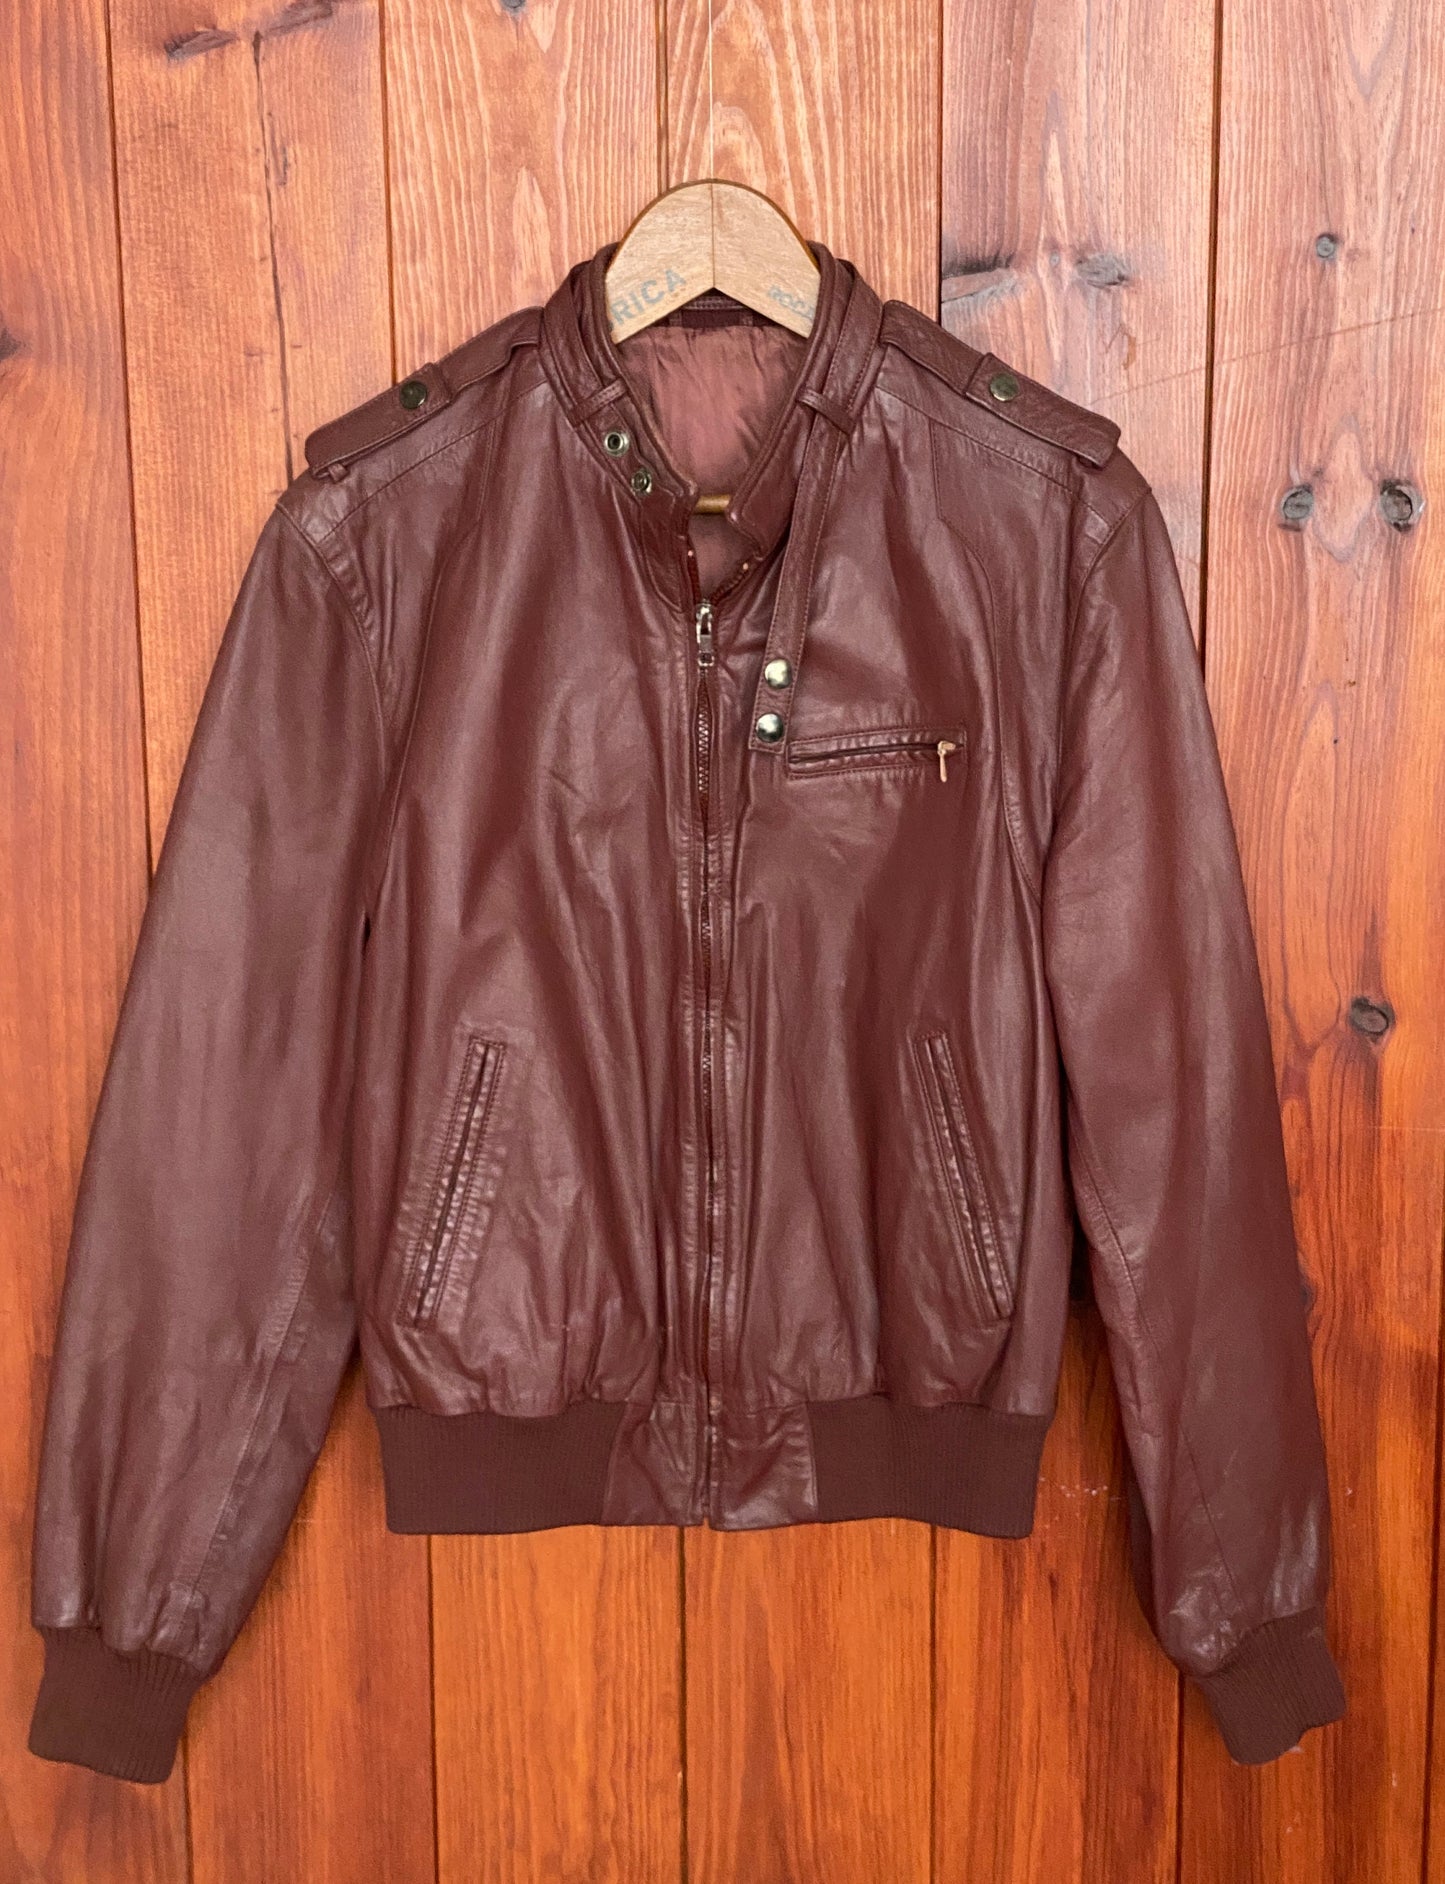 Size 42 Long (fit 50 euro ). 80s Vintage leather Jacket members only style